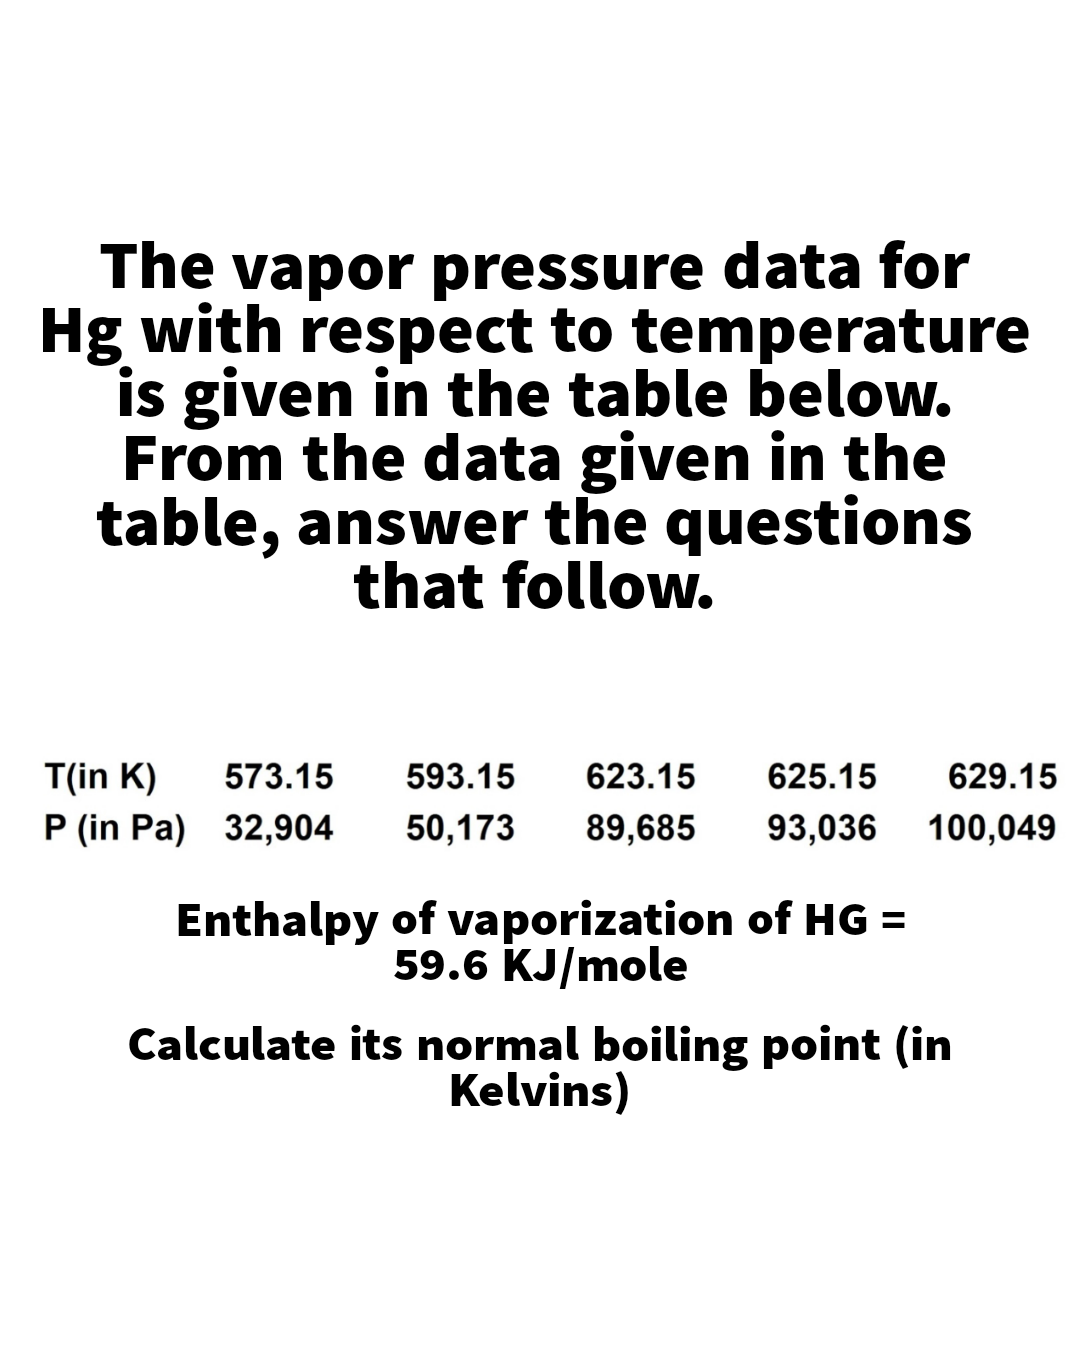 The vapor pressure data for
Hg with respect to temperature
is given in the table below.
From the data given in the
table, answer the questions
that follow.
T(in K)
P (in Pa) 32,904
573.15
593.15
623.15
625.15
629.15
50,173
89,685
93,036
100,049
Enthalpy of vaporization of HG =
59.6 KJ/mole
Calculate its normal boiling point (in
Kelvins)
